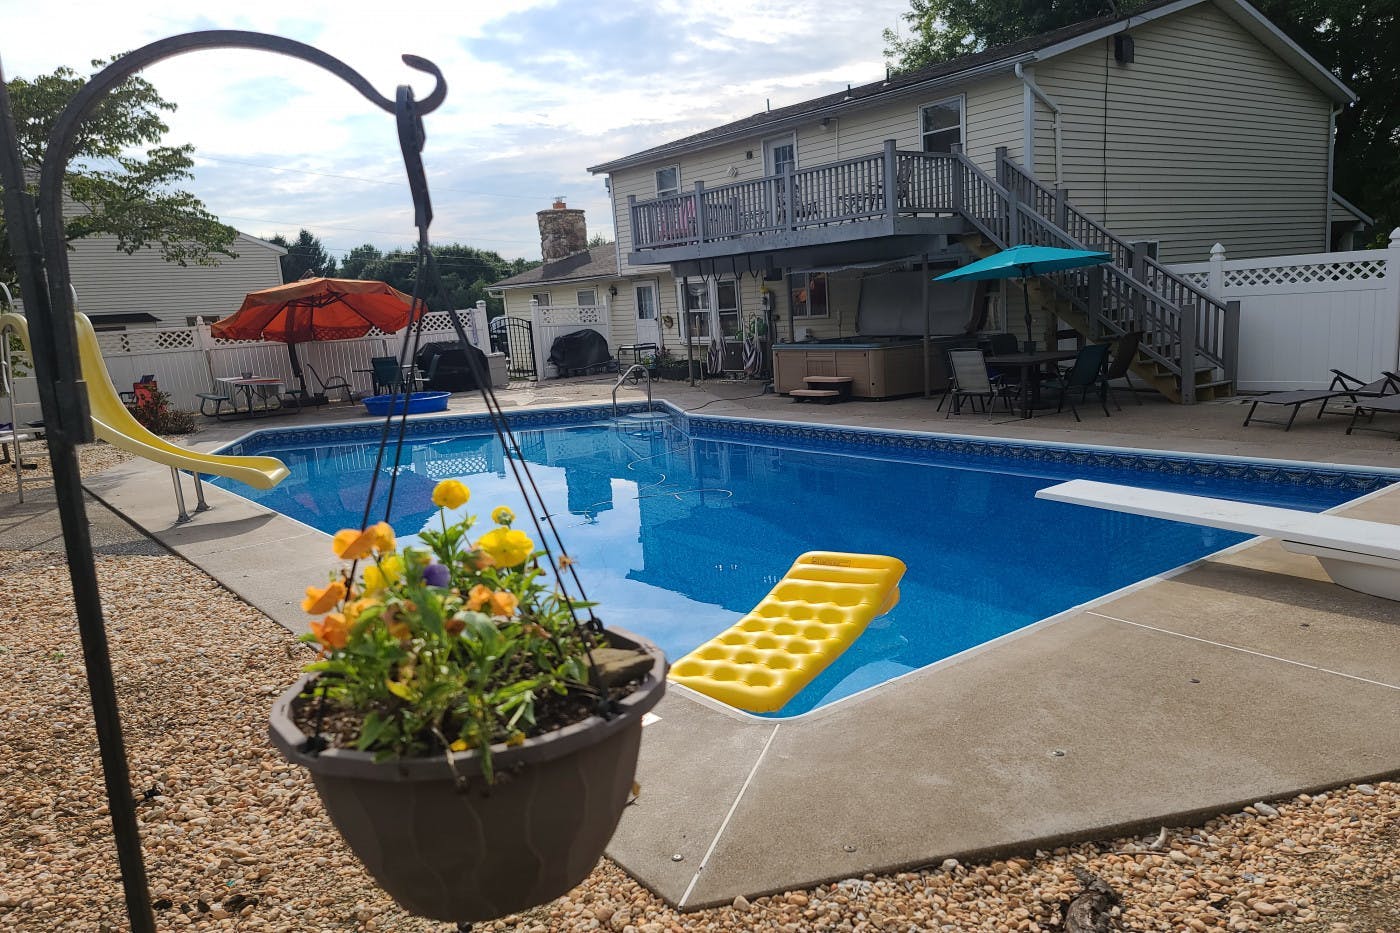 Large, Private Pool ☀️ Plenty of space and great for parties 🎉